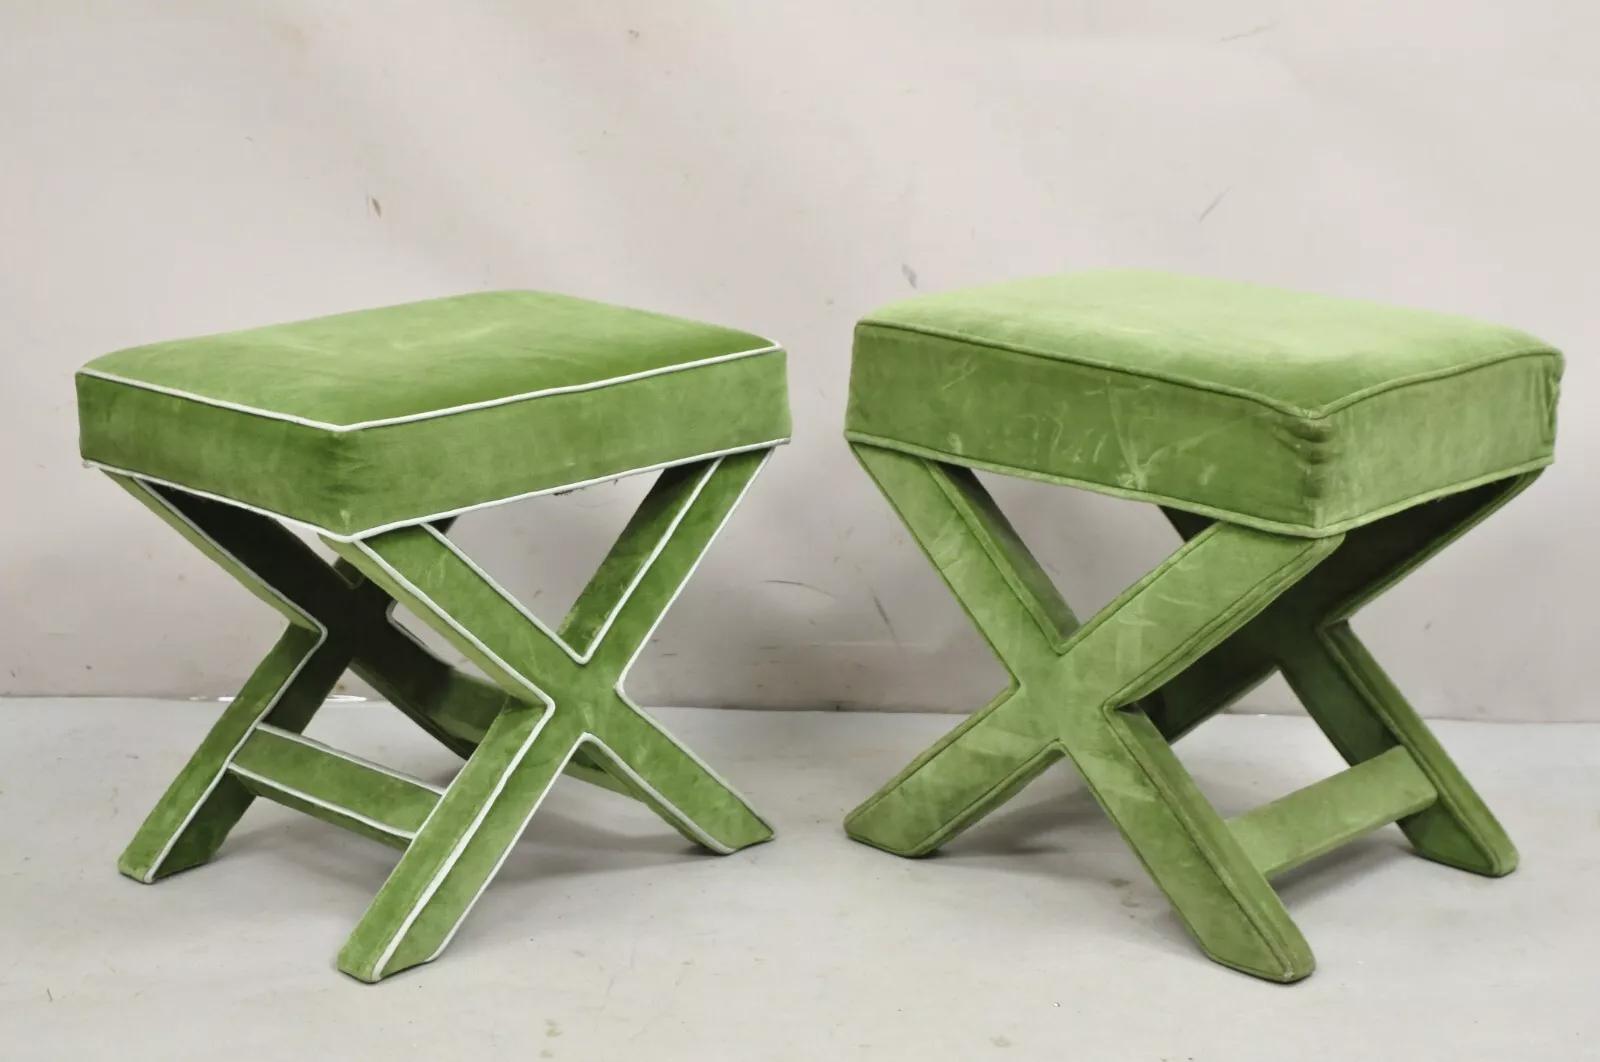 Vintage X-Base Billy Baldwin Style Green Upholstered Hollywood Regency Bench Stools - Similar Pair with Some Differences. Circa Mid 20th Century. Measurements: Larger: 20